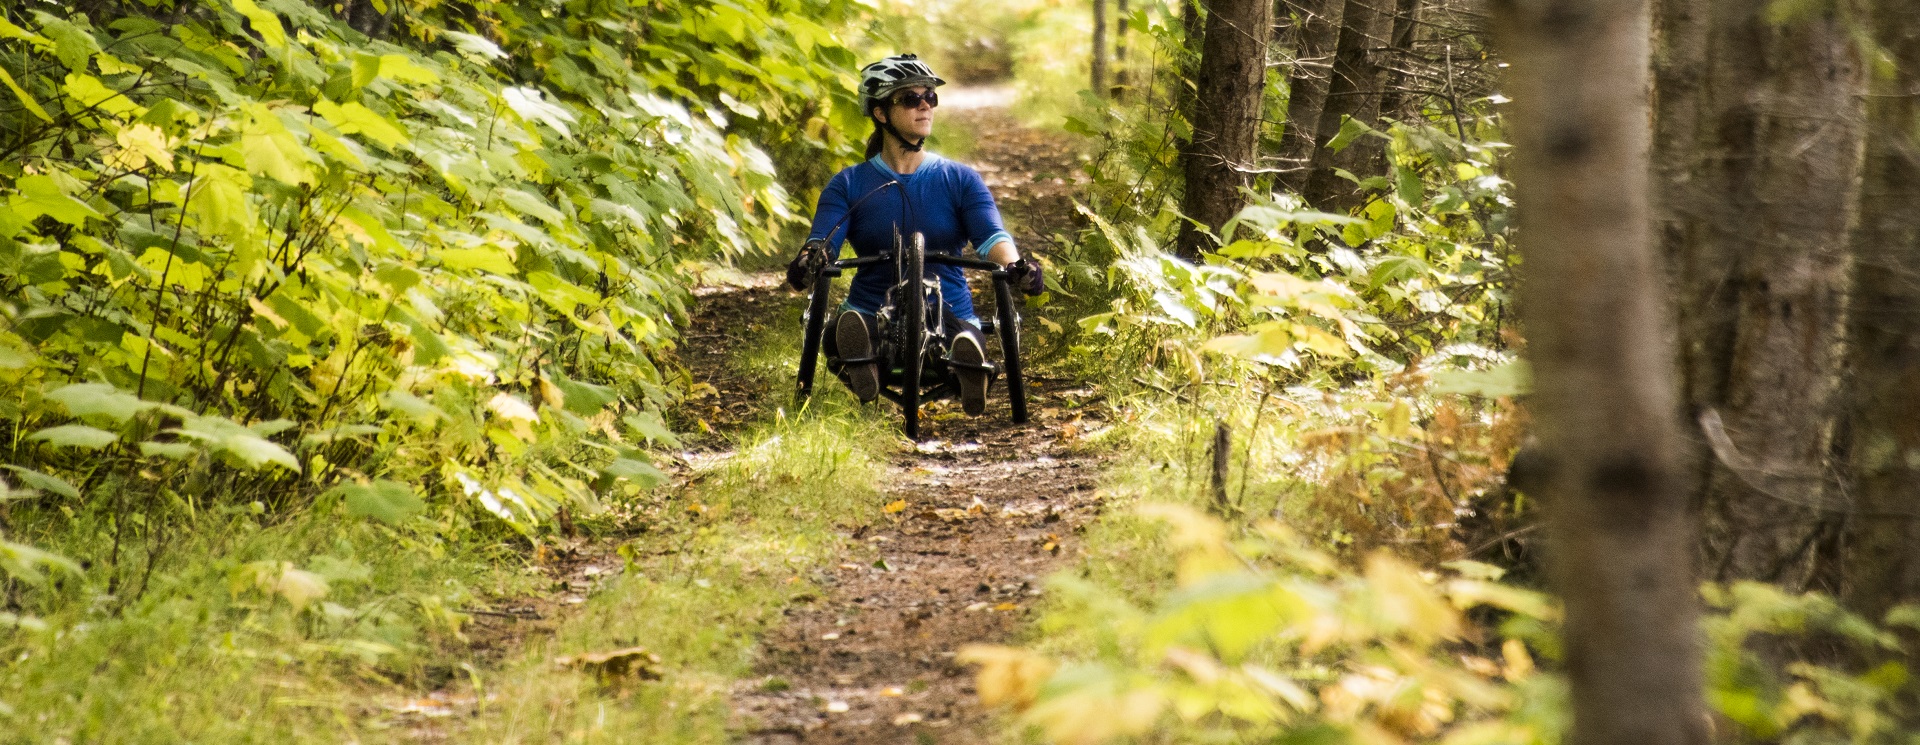 A person uses a mobility device to hike through the forest